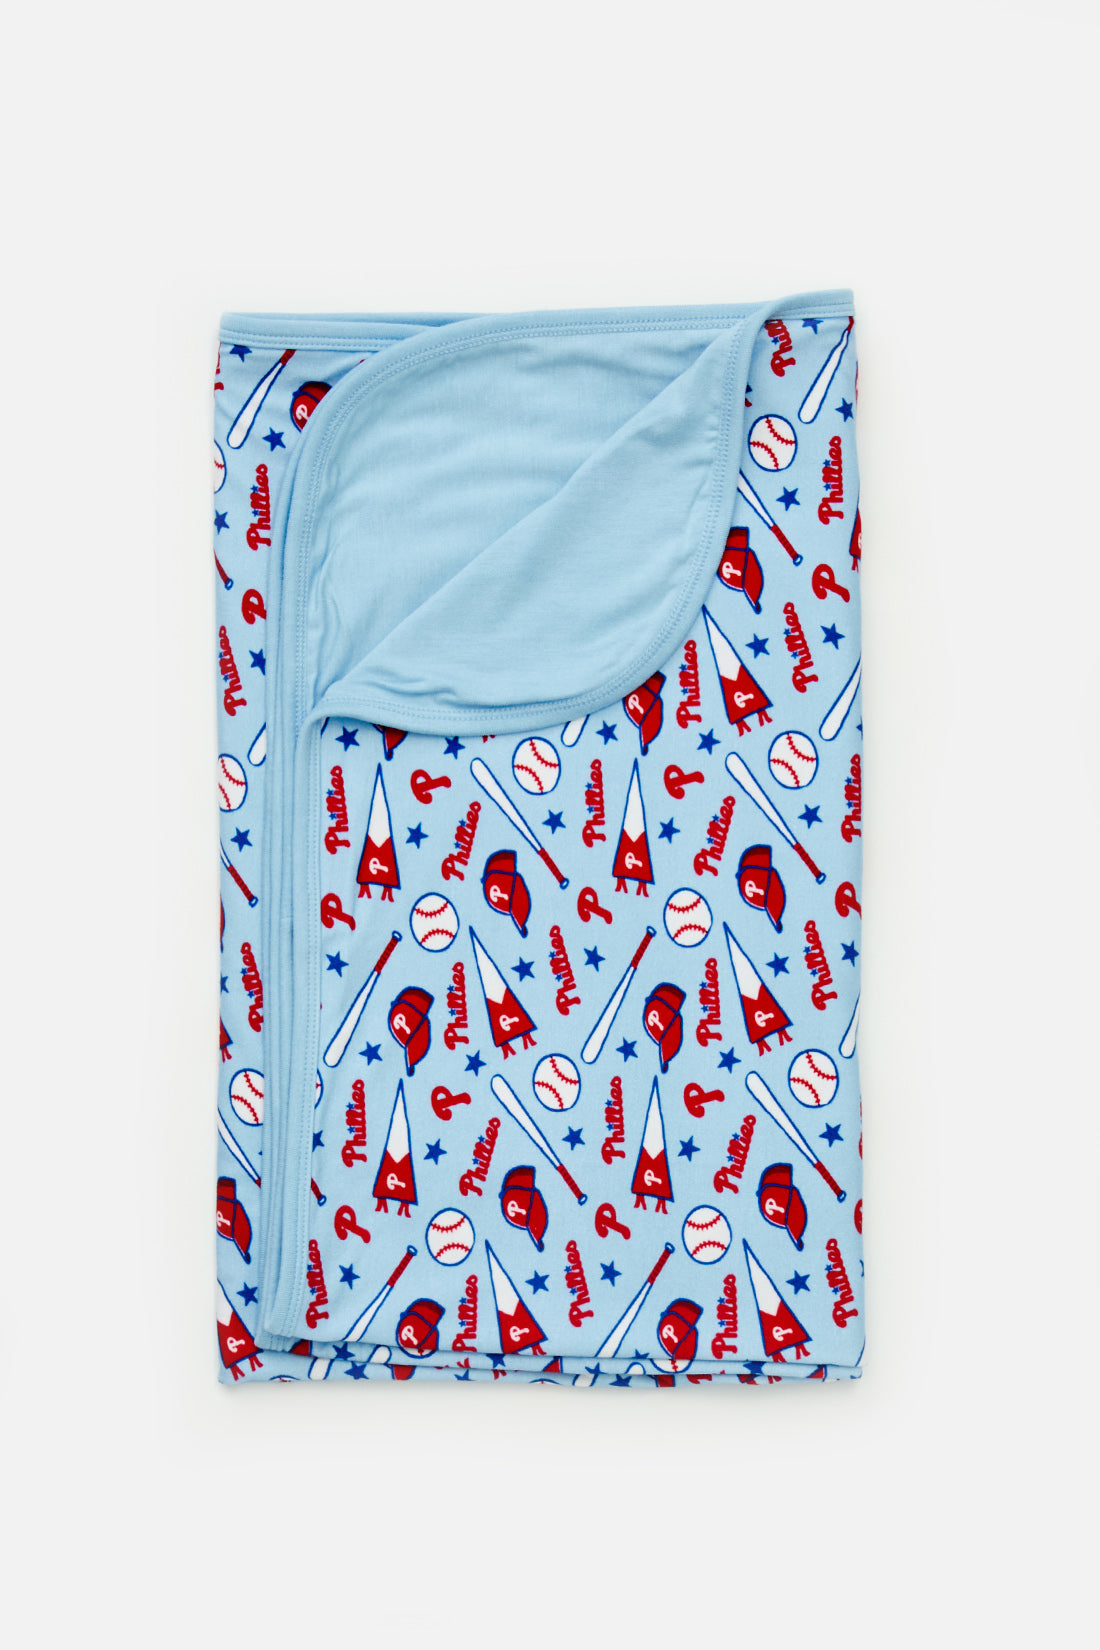 Stretchy Oversized Blanket - Phillies